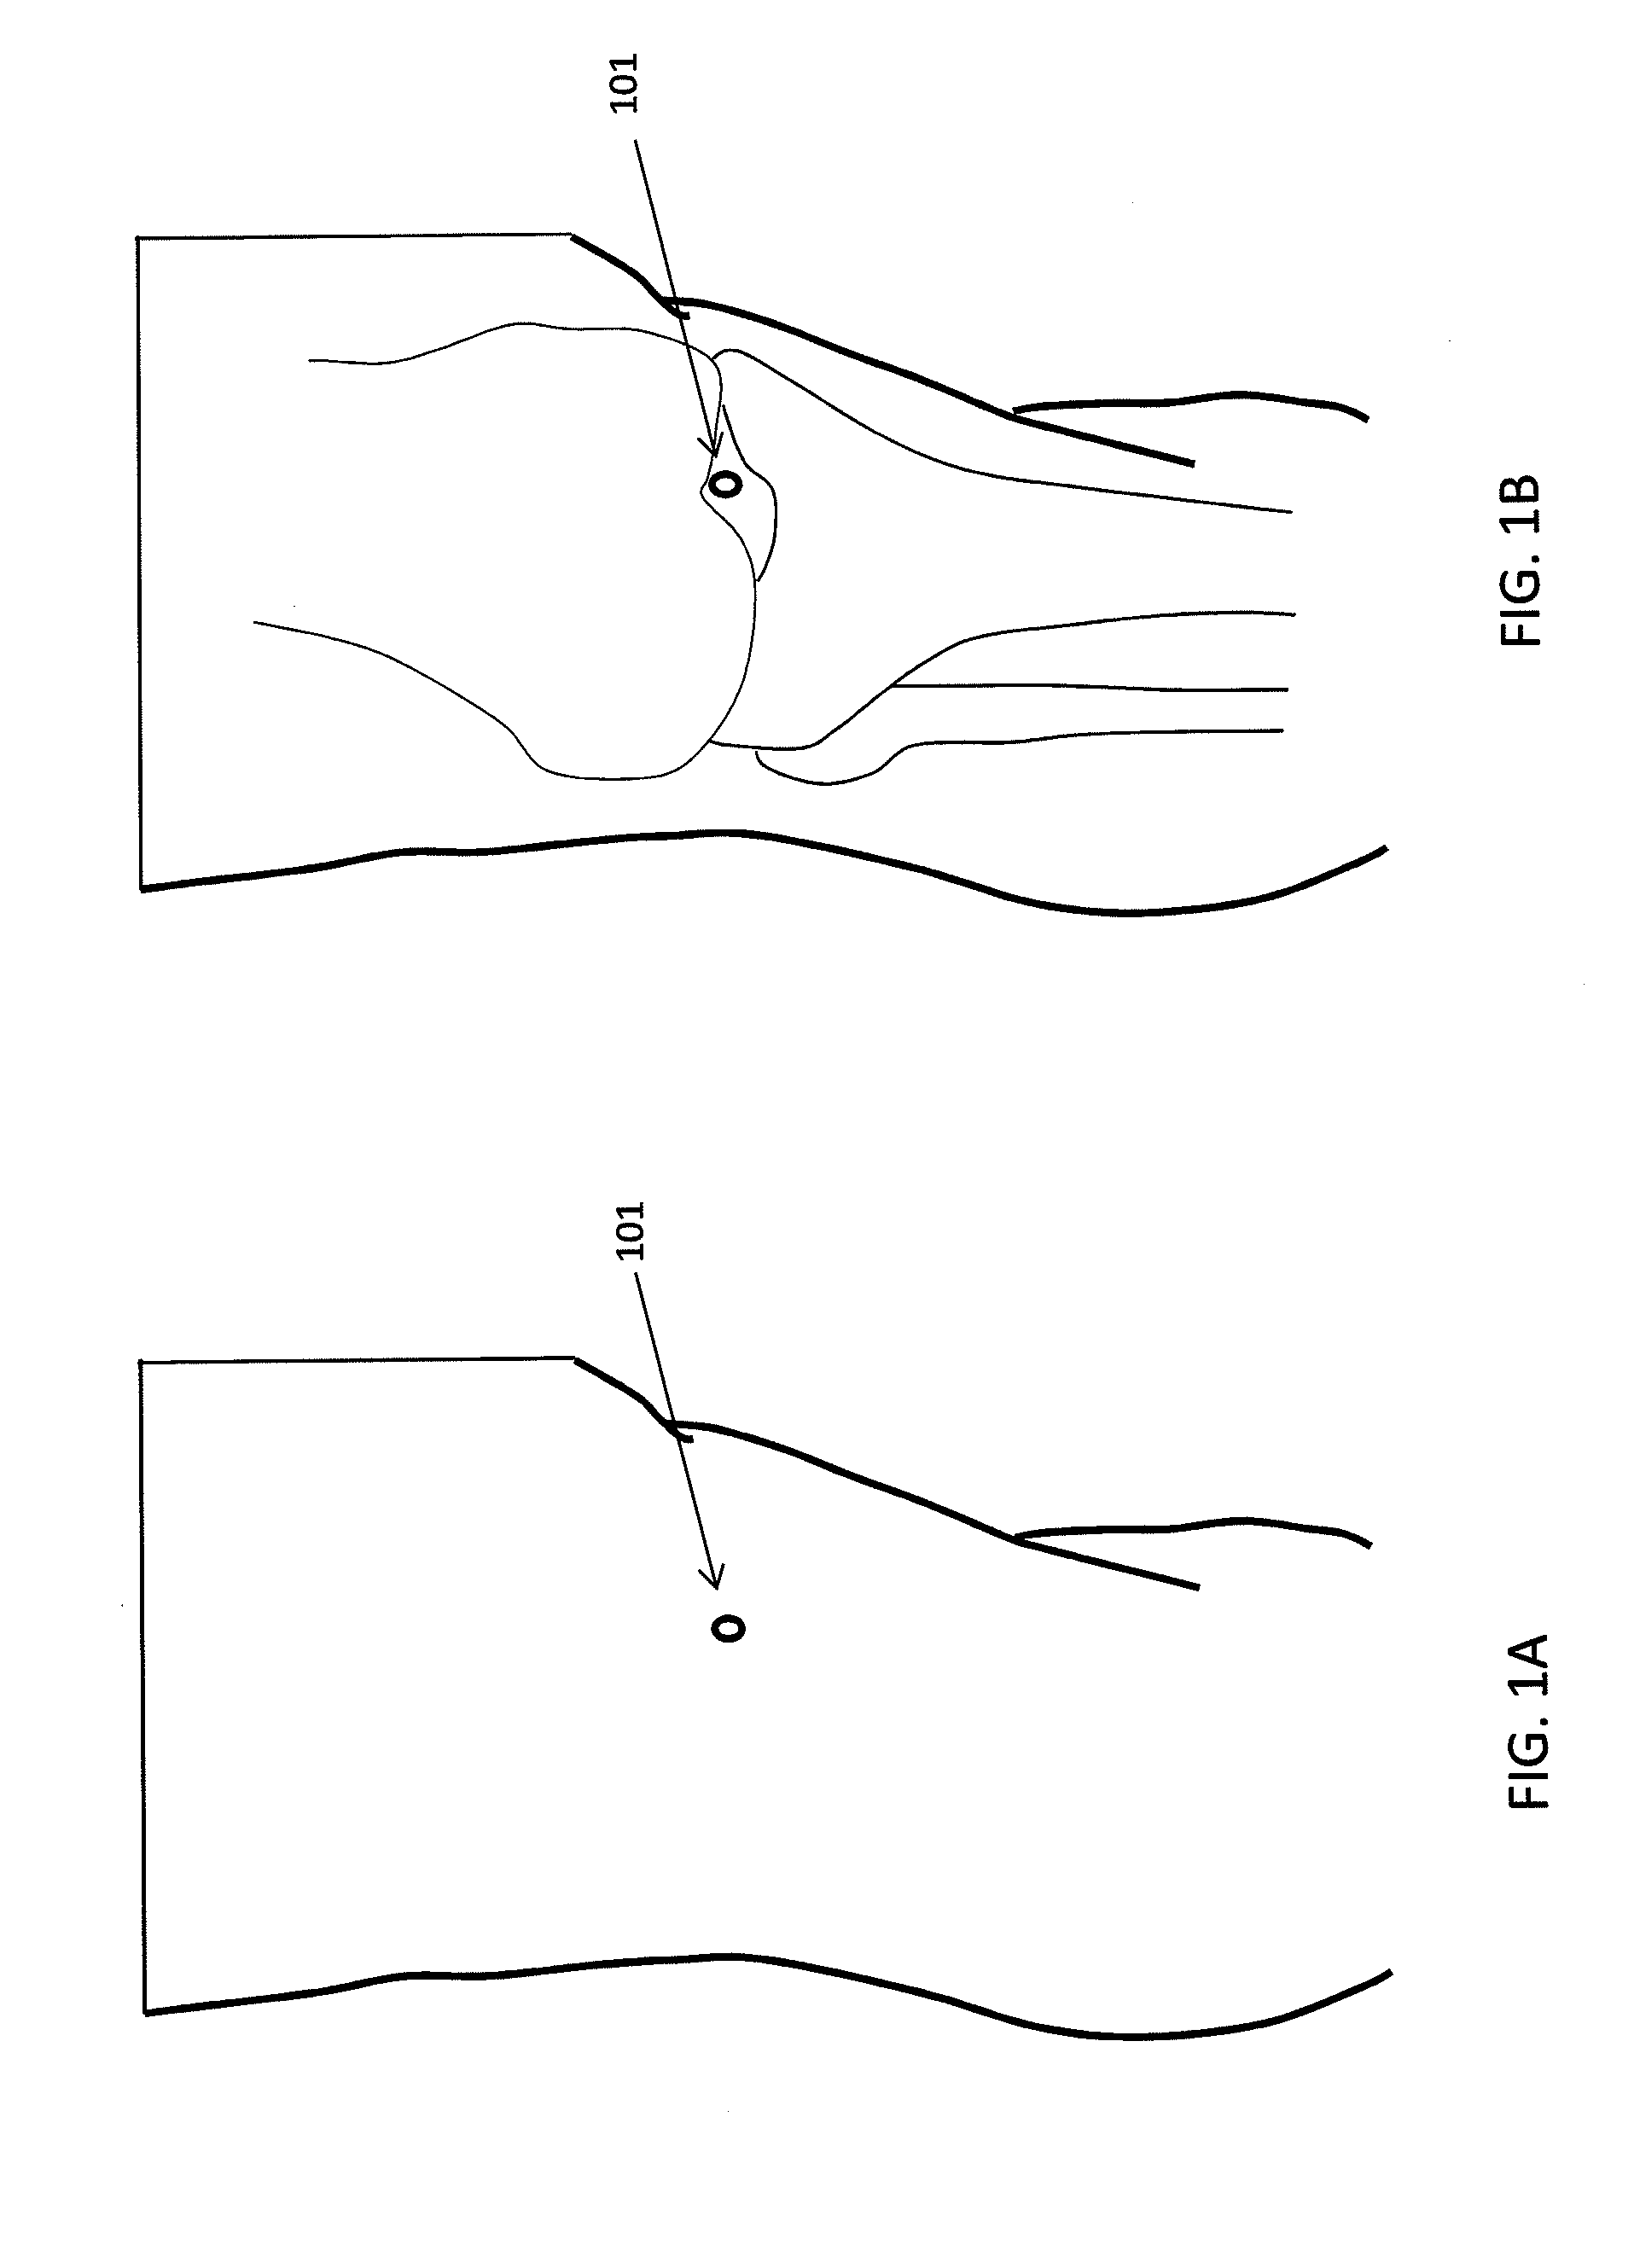 Methods and devices for preventing tissue bridging while suturing